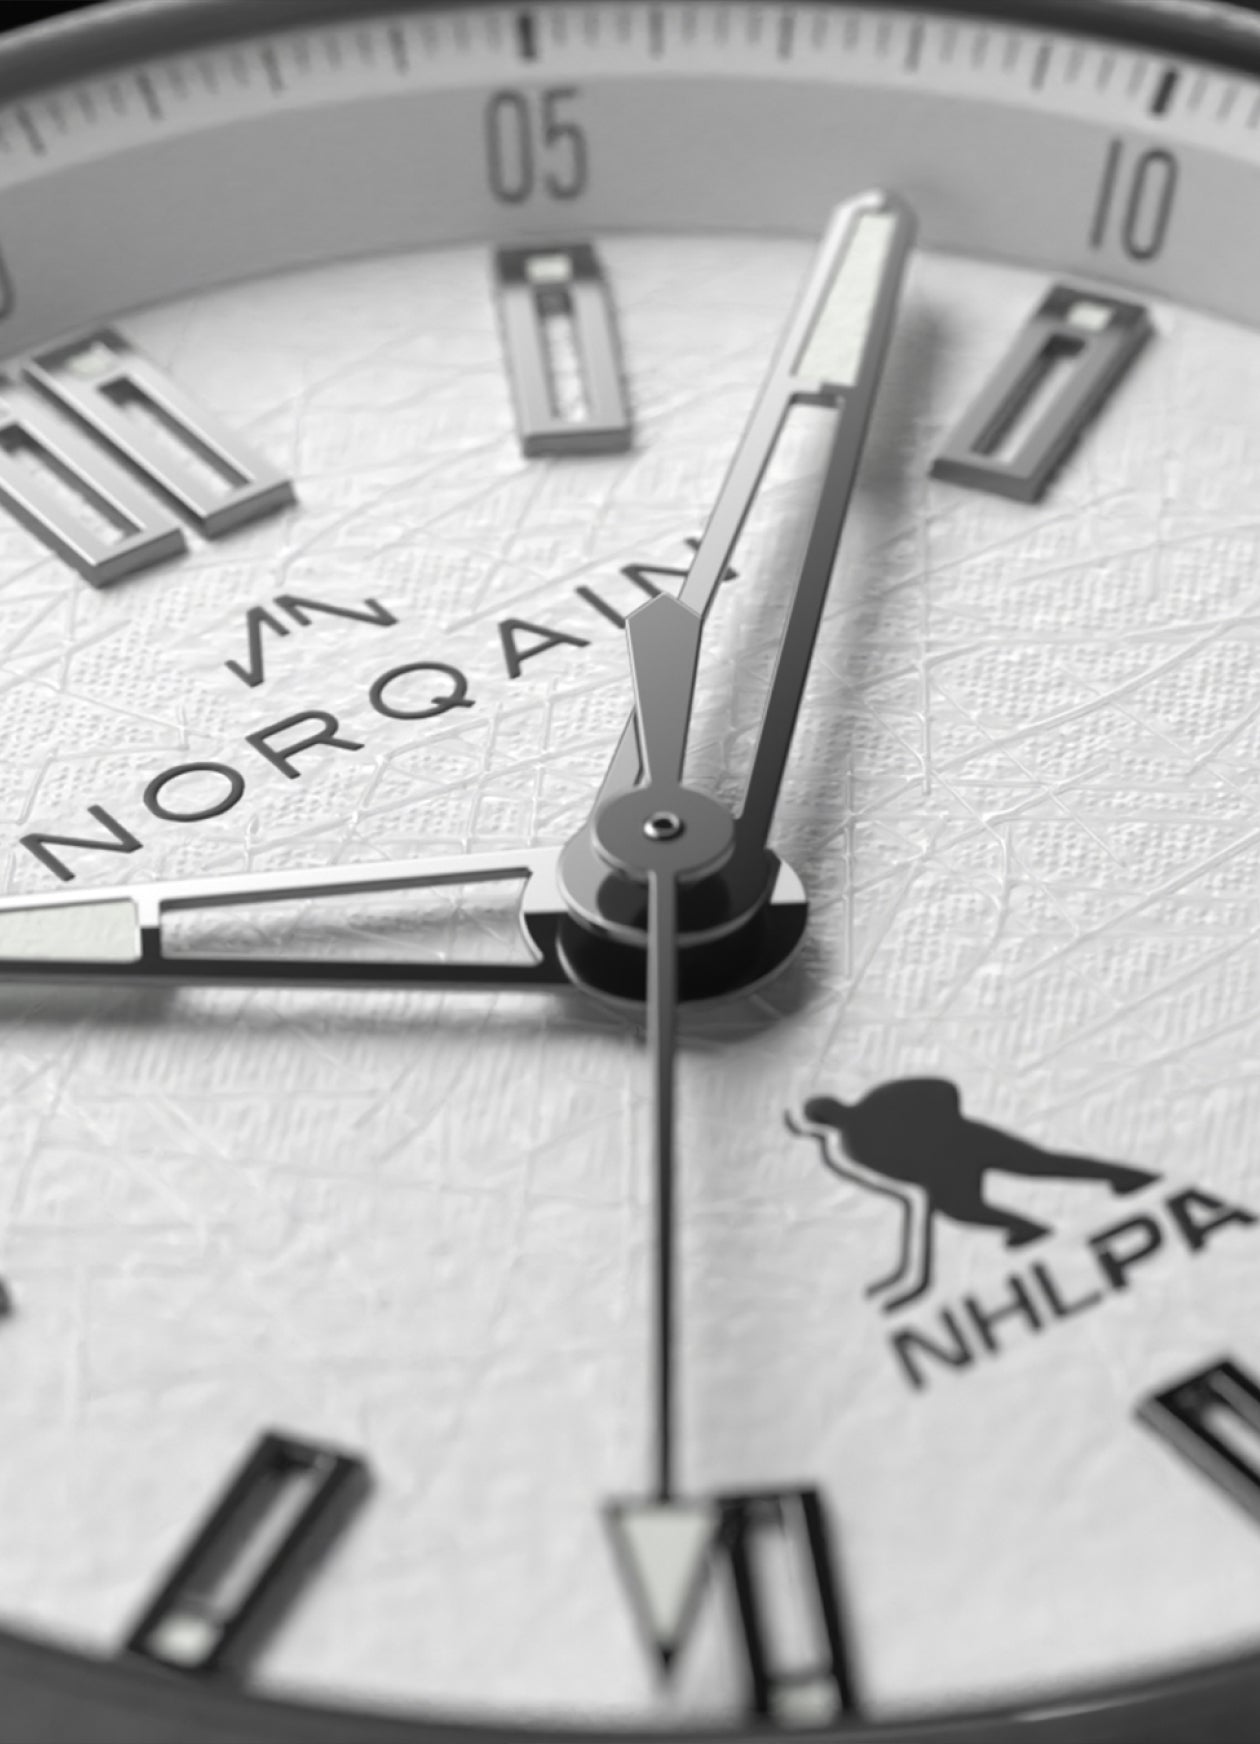 Independent Swiss Watchmaker Norqain Renews Partnership With The NHLPA And Celebrates With a New Limited Edition Wild One Model